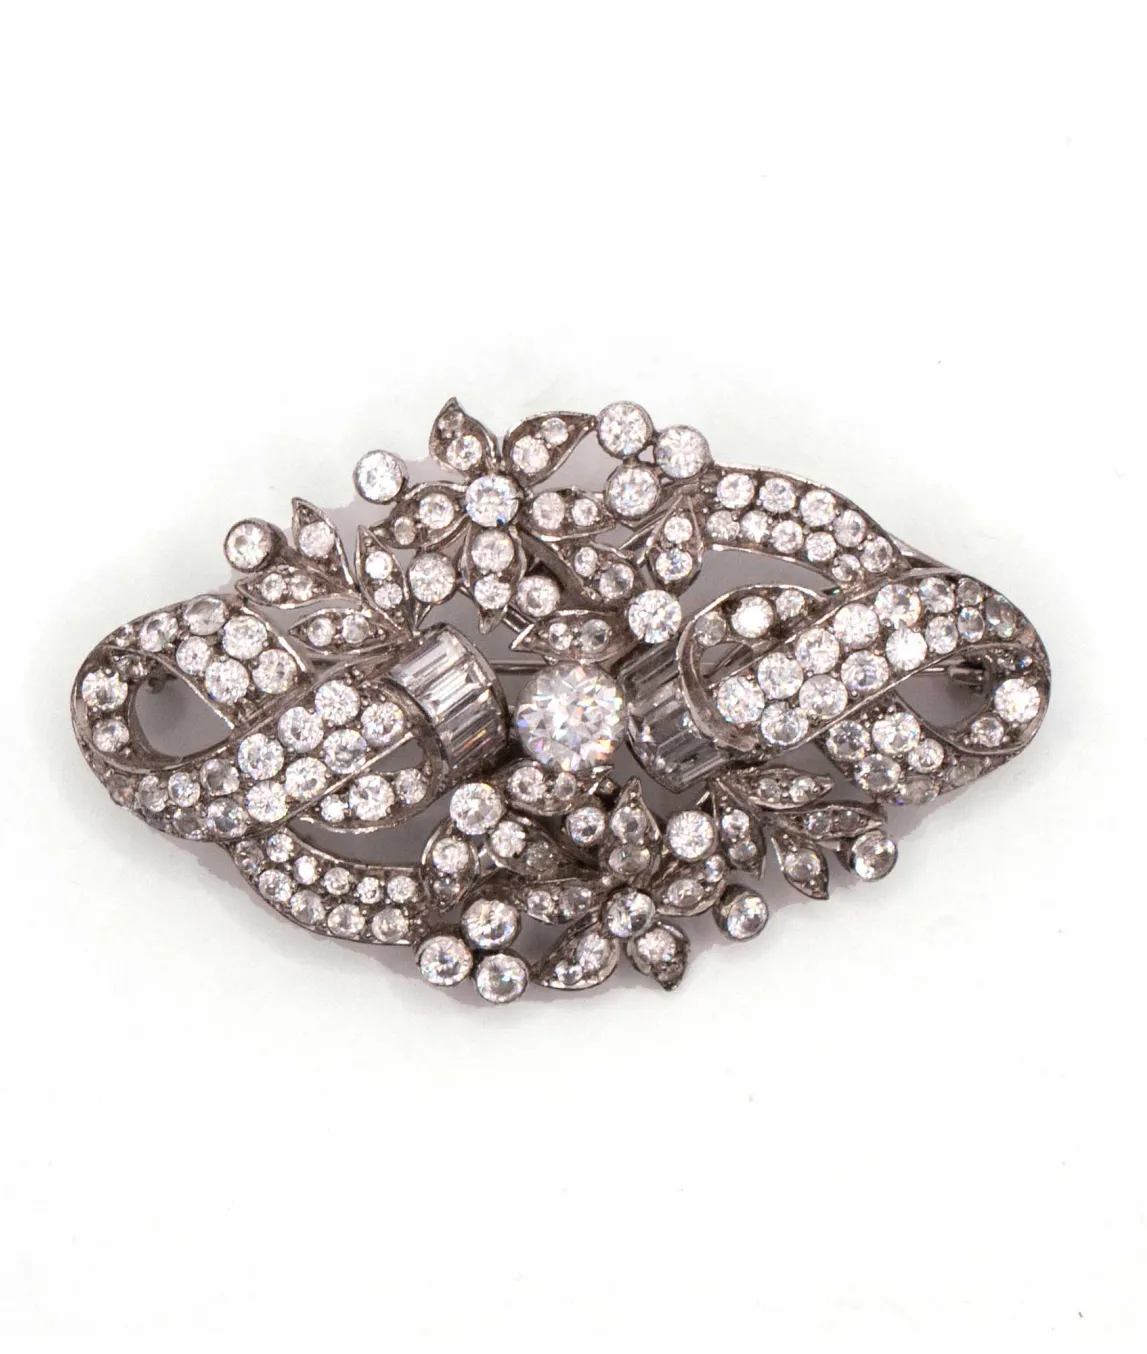 1930s colourless gem double clip brooch with floral details